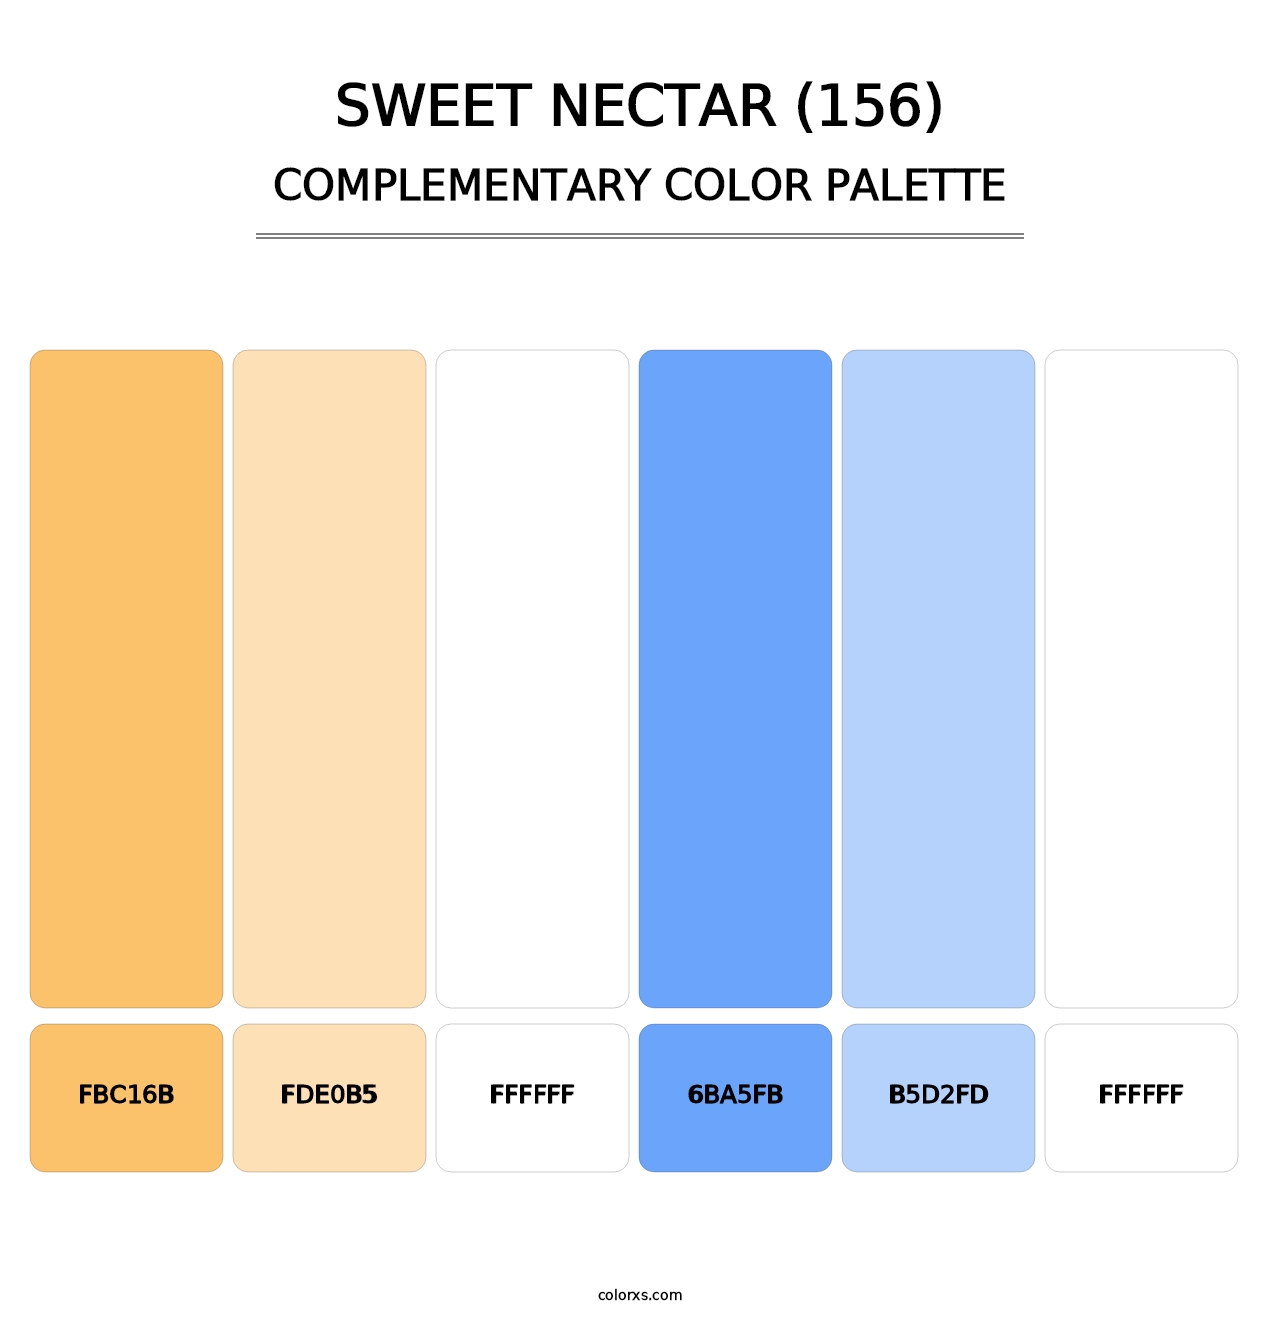 Sweet Nectar (156) - Complementary Color Palette